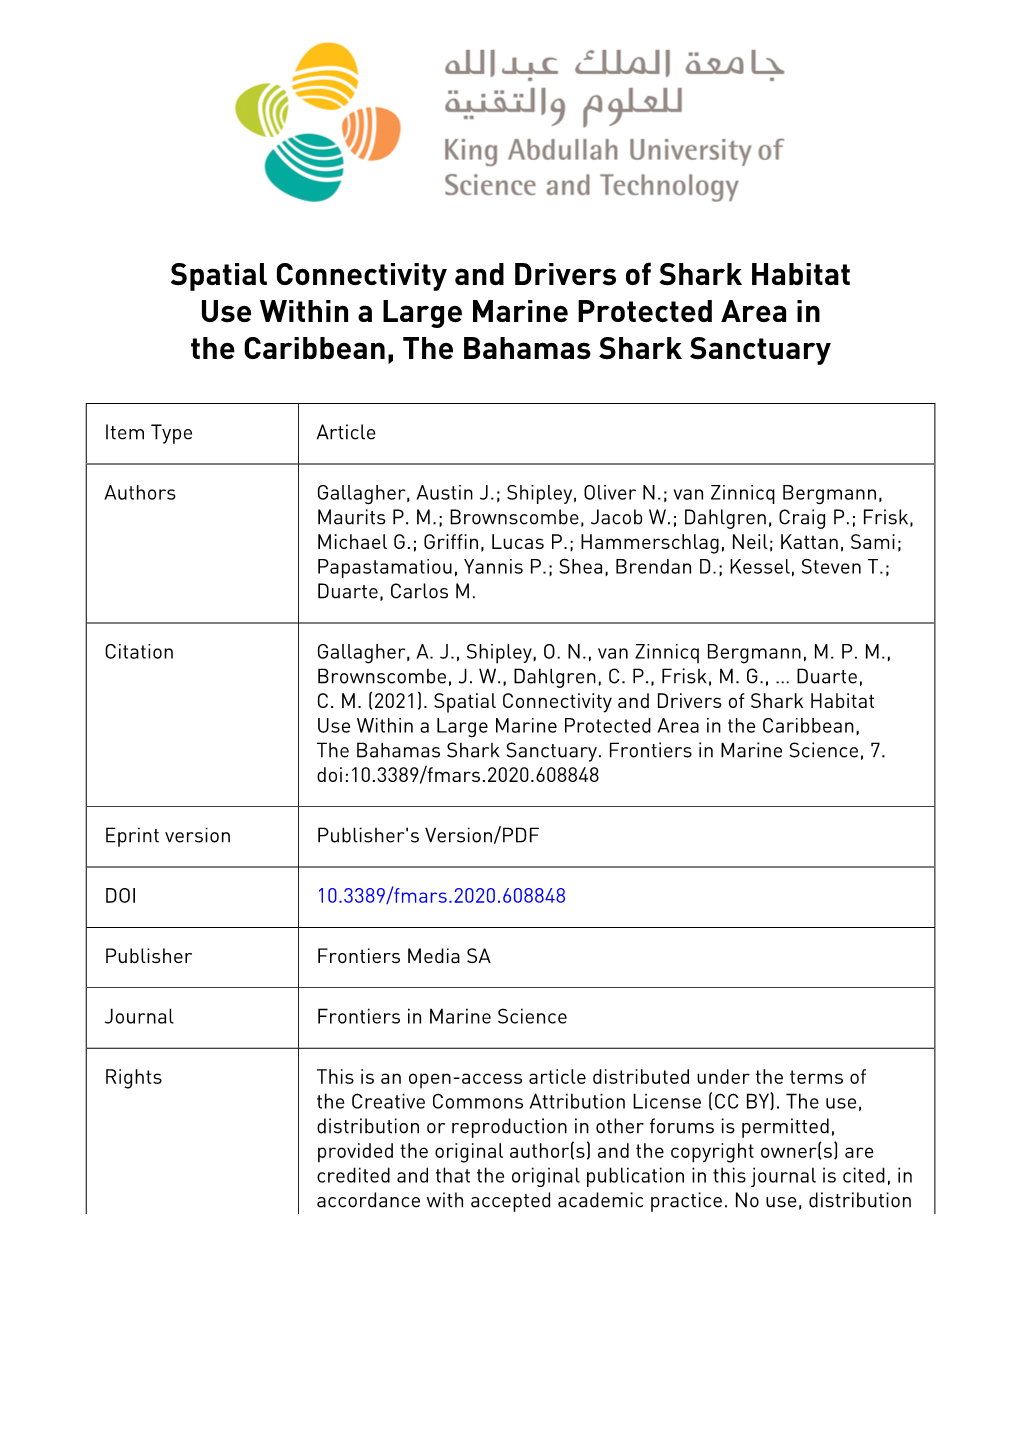 Spatial Connectivity and Drivers of Shark Habitat Use Within a Large Marine Protected Area in the Caribbean, the Bahamas Shark Sanctuary